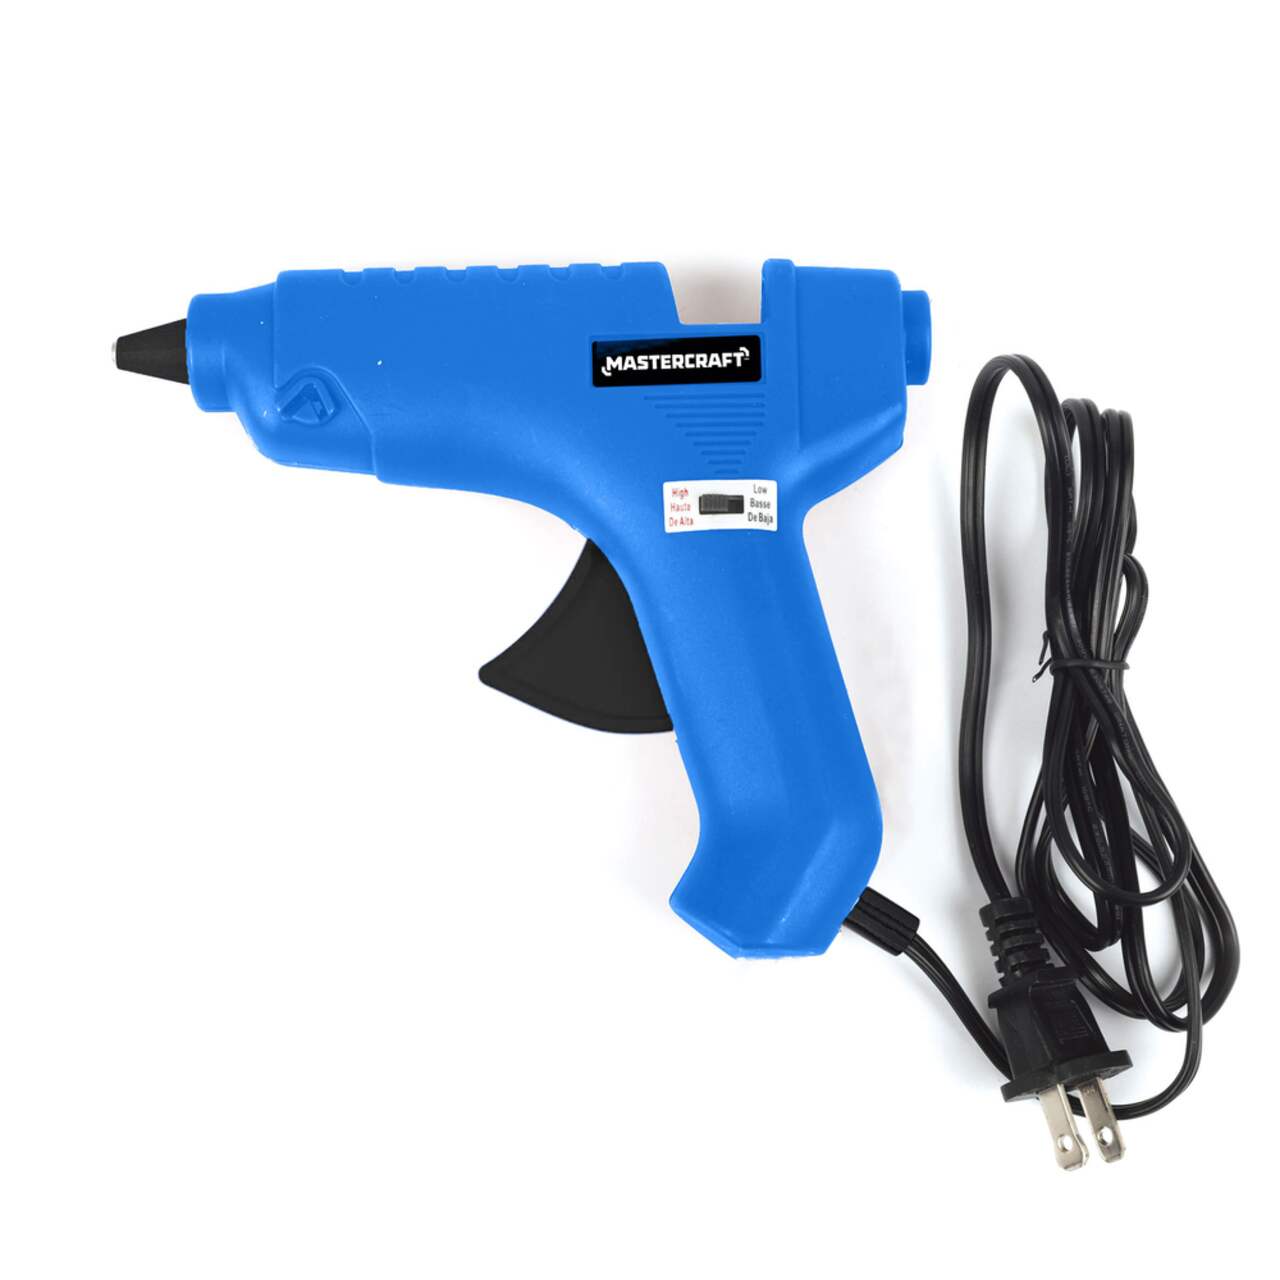 https://media-www.canadiantire.ca/product/fixing/tools/manual-fastening/0540108/mastercraft-2-temperature-40w-glue-gun-8ff64d51-24d2-4e28-8e4e-a574e274f022.png?imdensity=1&imwidth=640&impolicy=mZoom